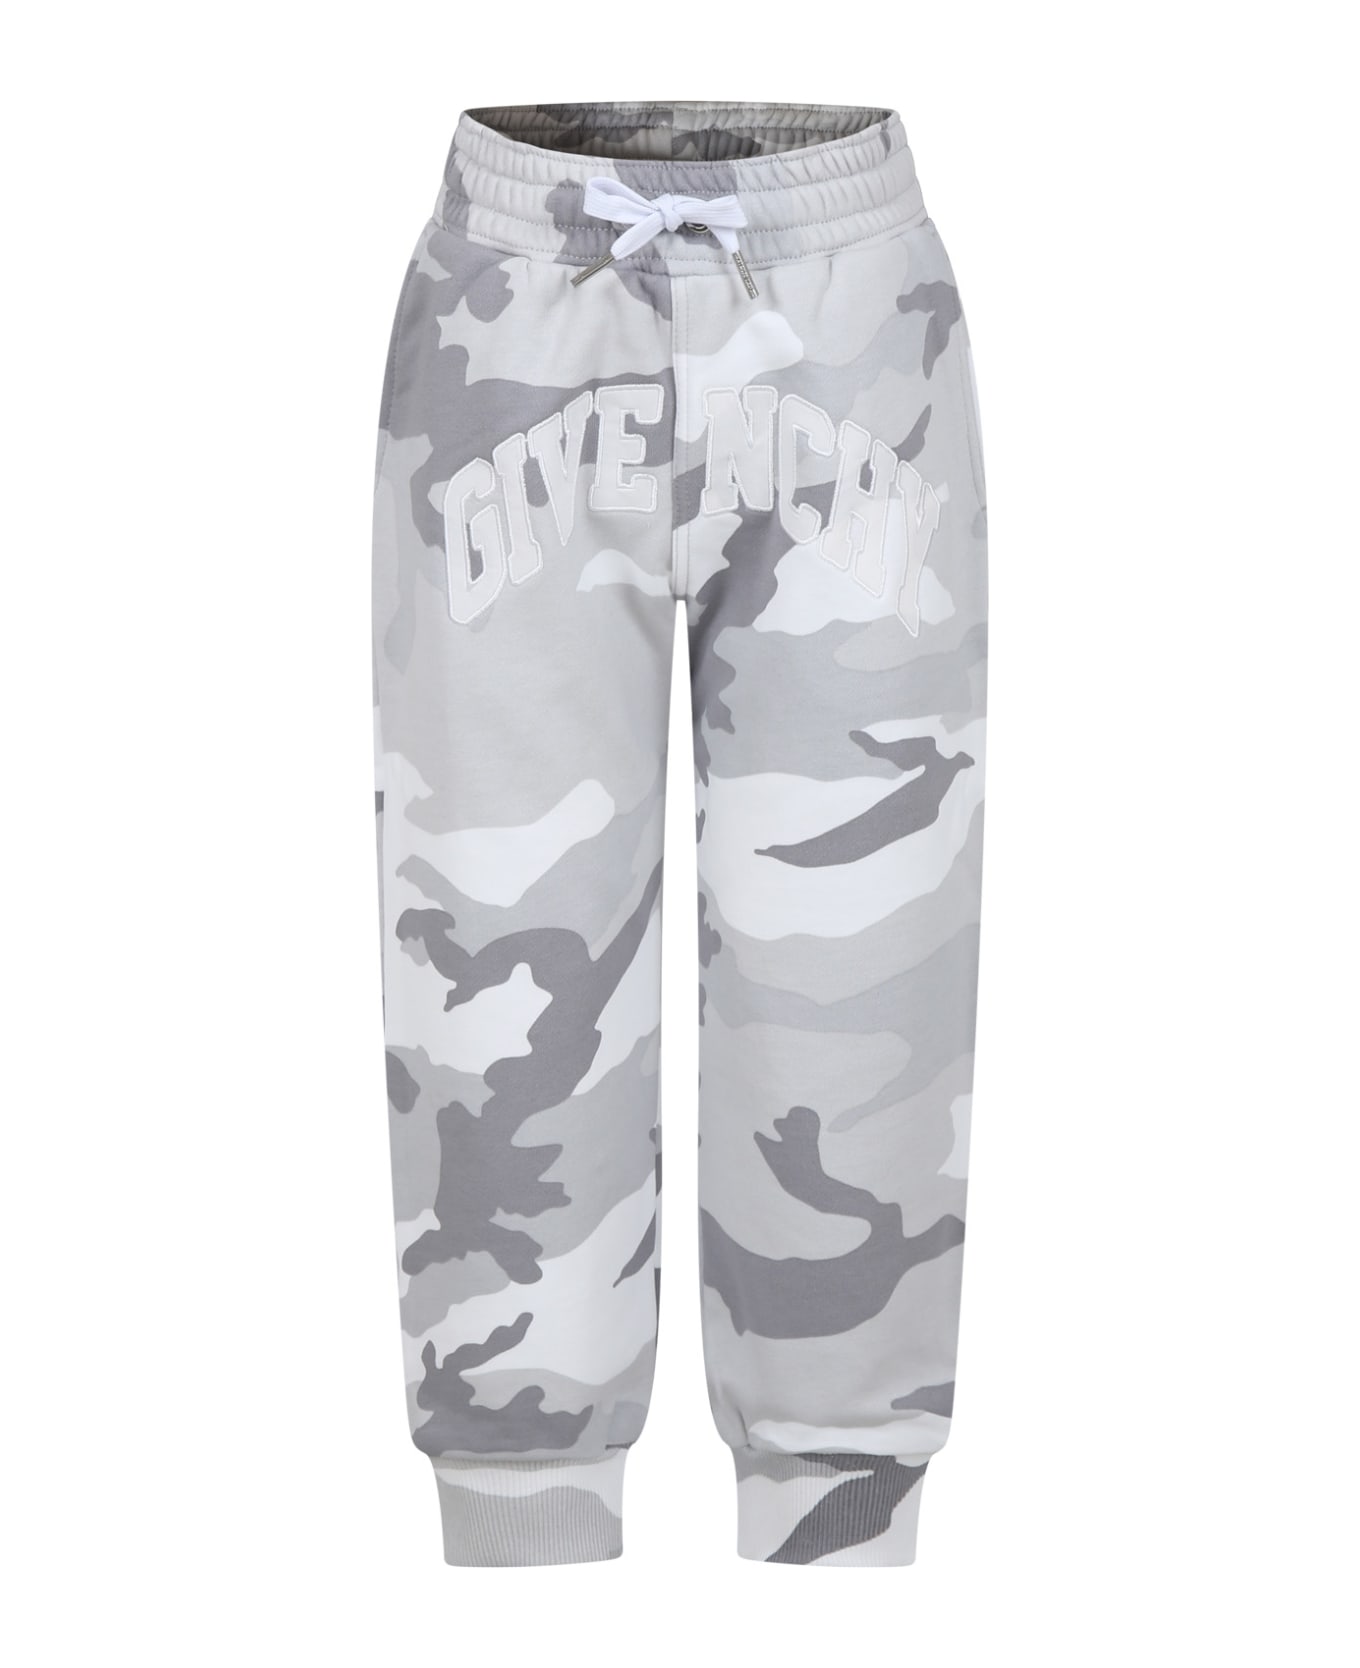 Givenchy Gray Trousers For Kids With Camouflage Pattern - Grey